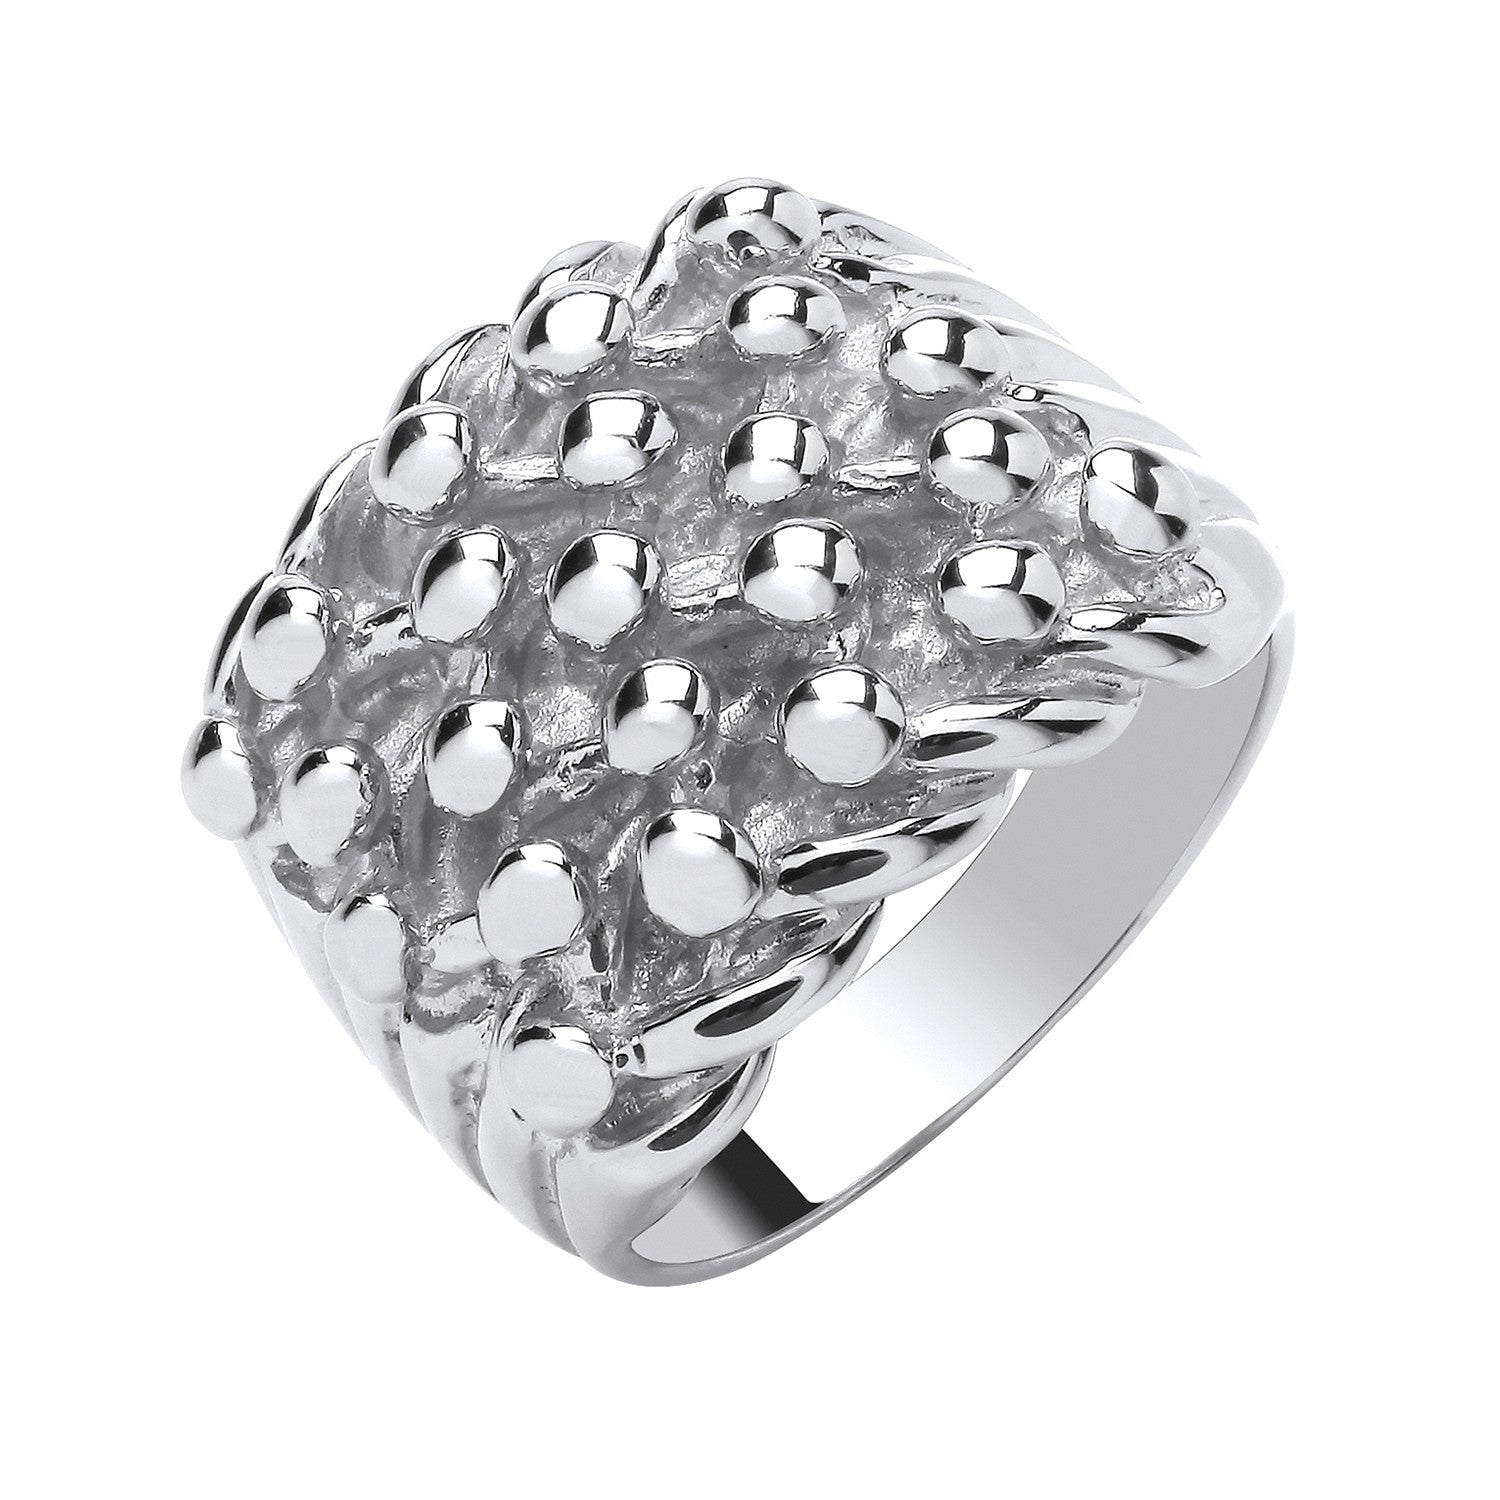 Silver 5 Row Keeper, Woven Back Ring